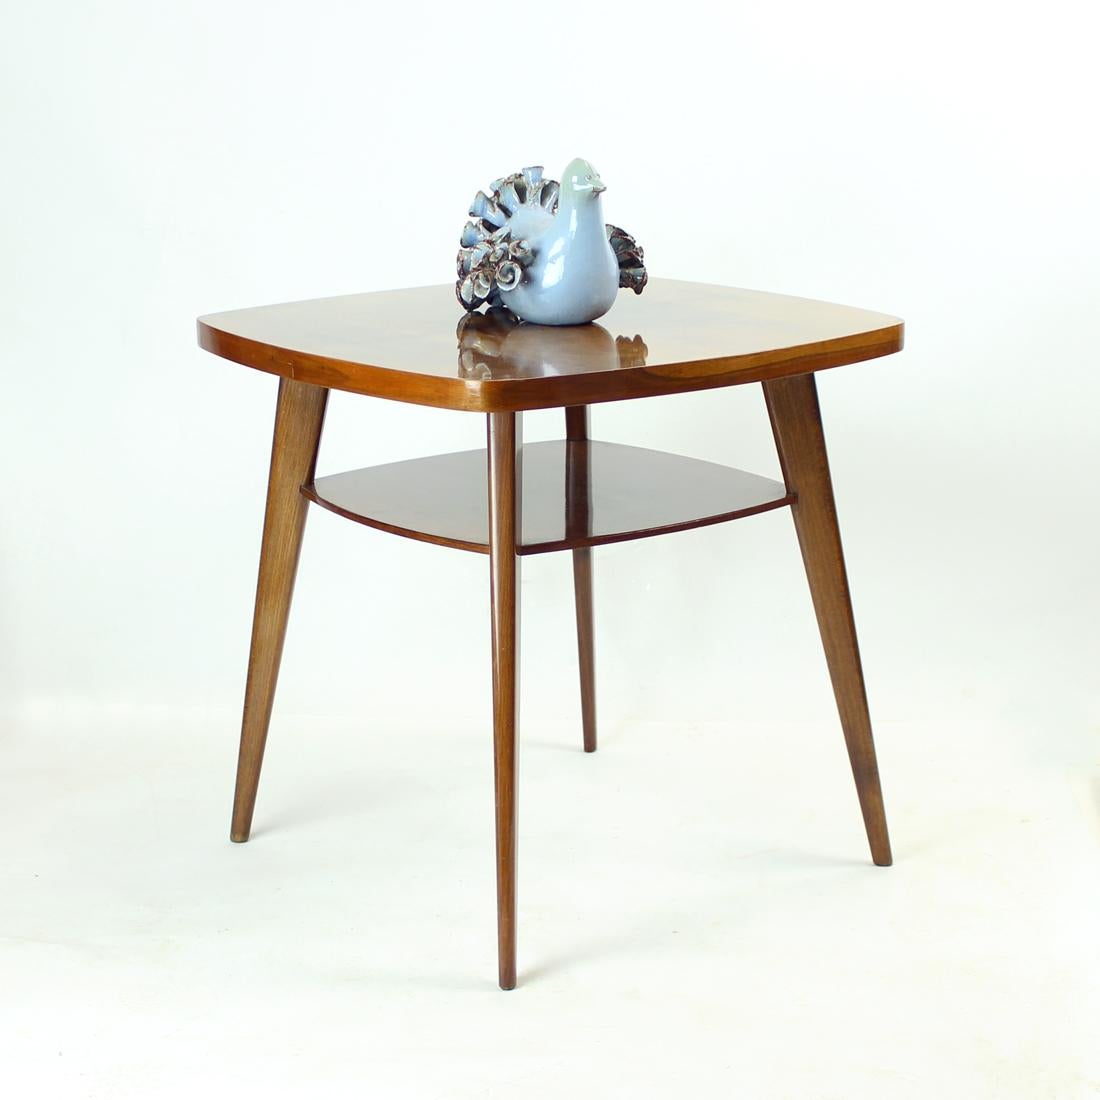 Slovak Walnut Spider Coffee Table by Mier, 1960s For Sale